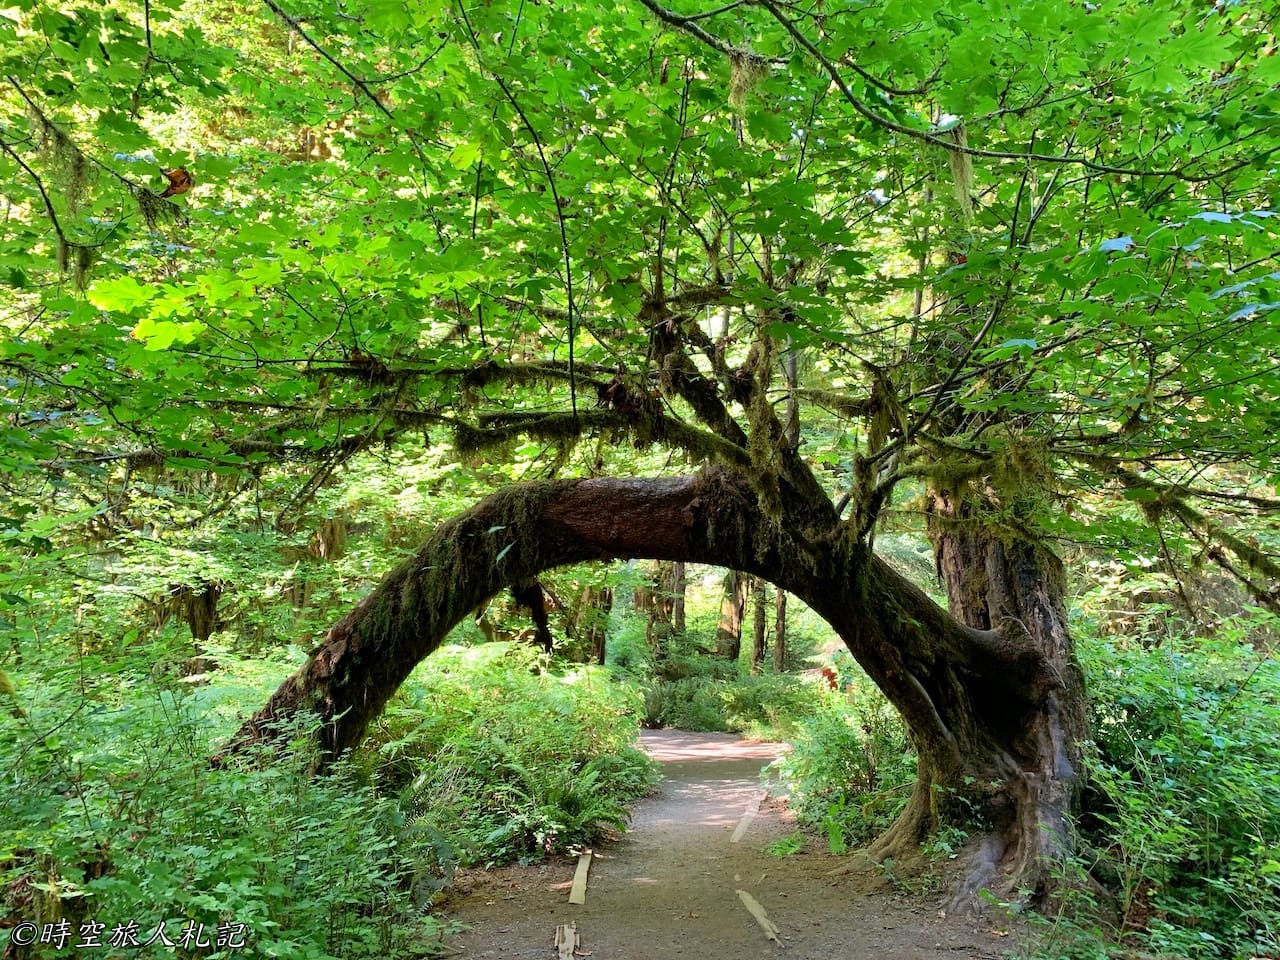 Olympic national park,奧林匹克國家公園 15